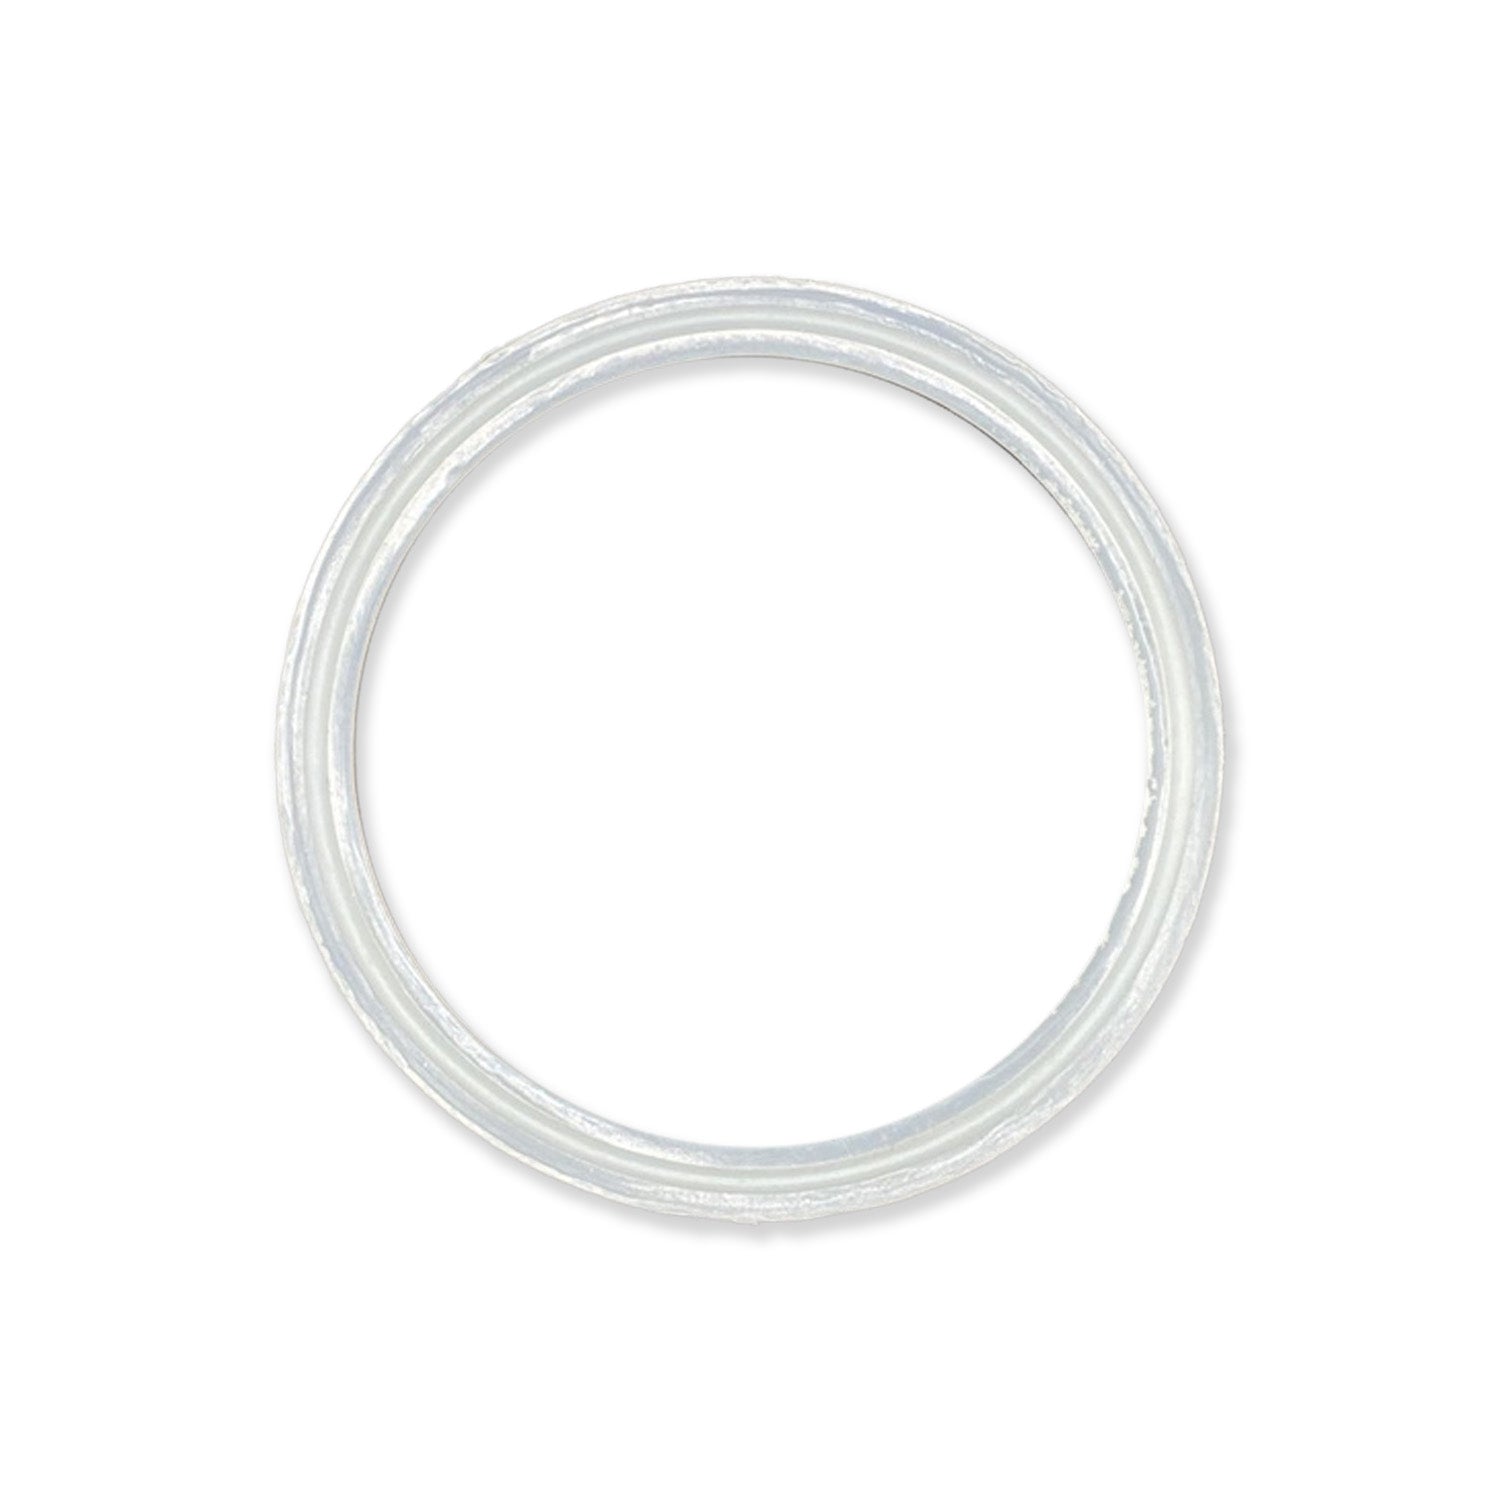 3.5" Tri-Clamp Gasket, Silicone, clear